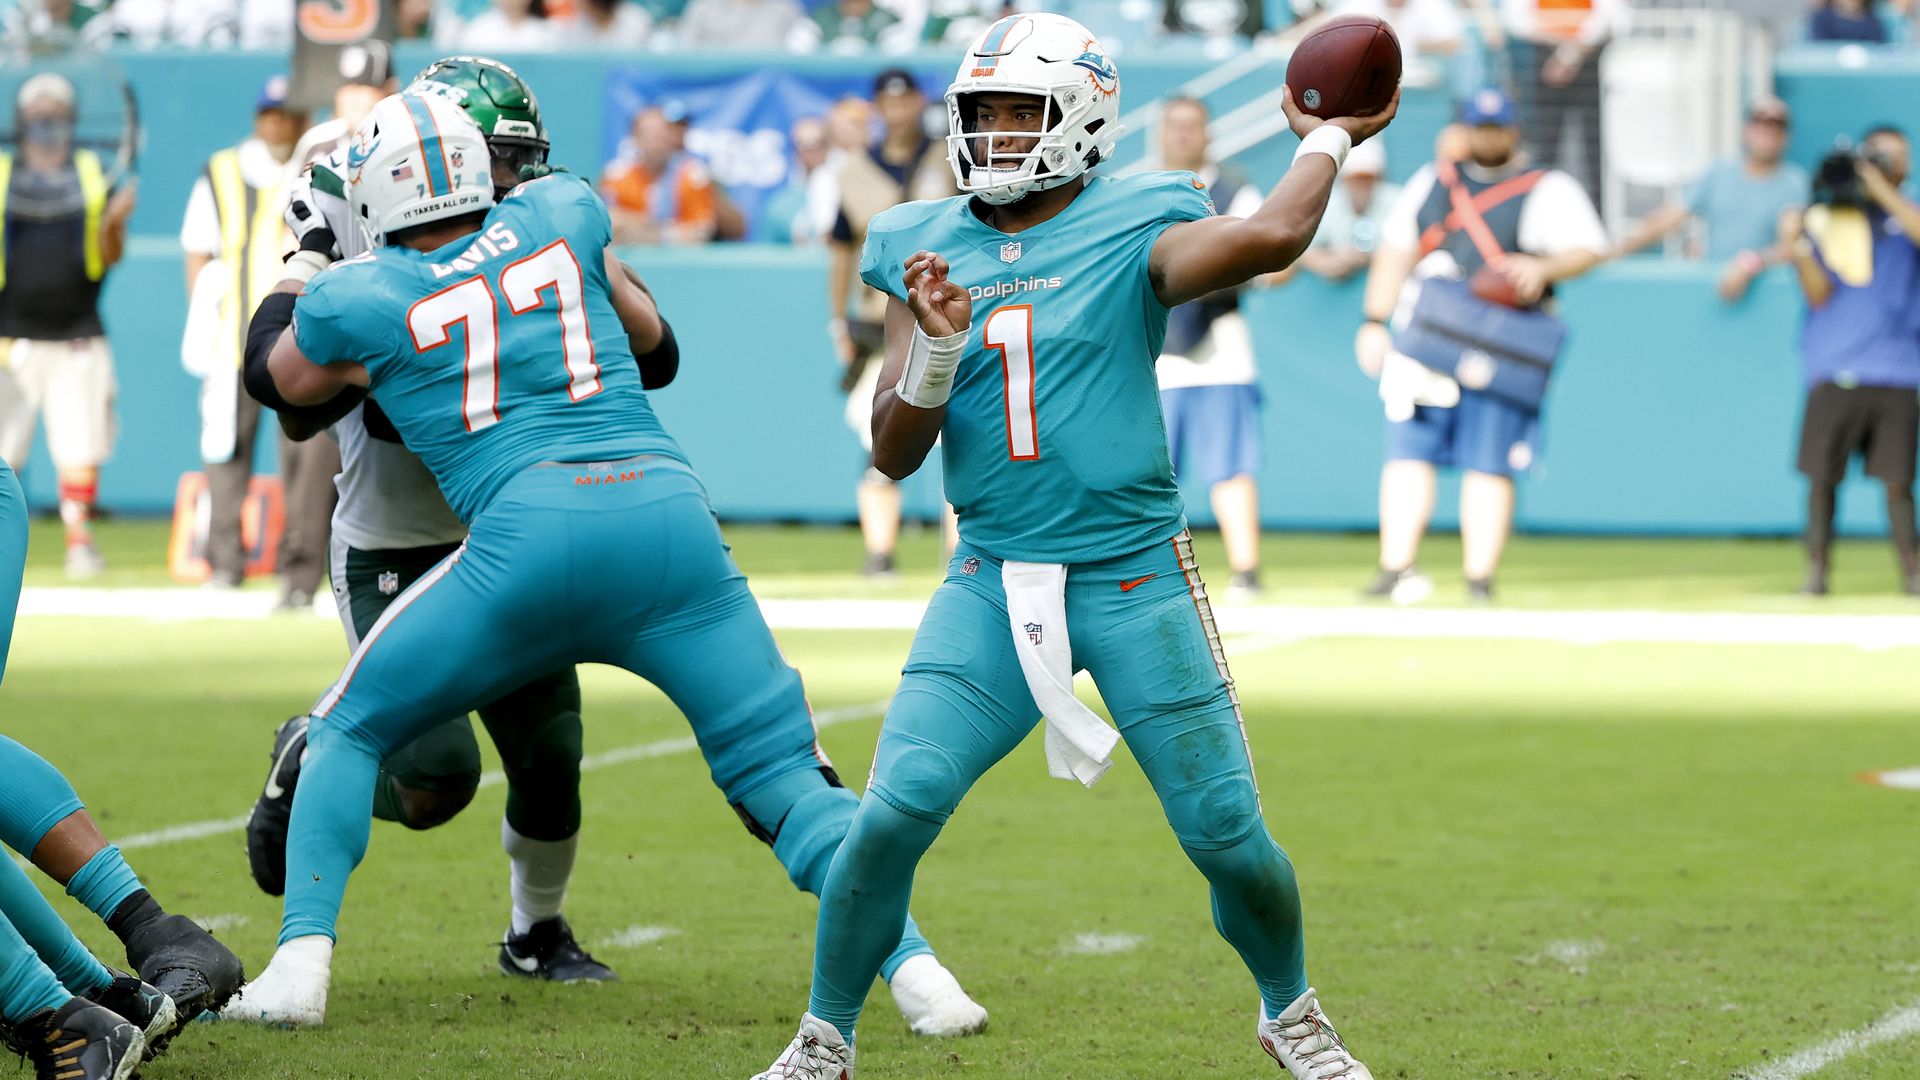 Tua Tagovailoa #1 of the Miami Dolphins looks to make a pass play against the New York Jets in the second half at Hard Rock Stadium on December 19, 2021 in Miami Gardens, Florida. 